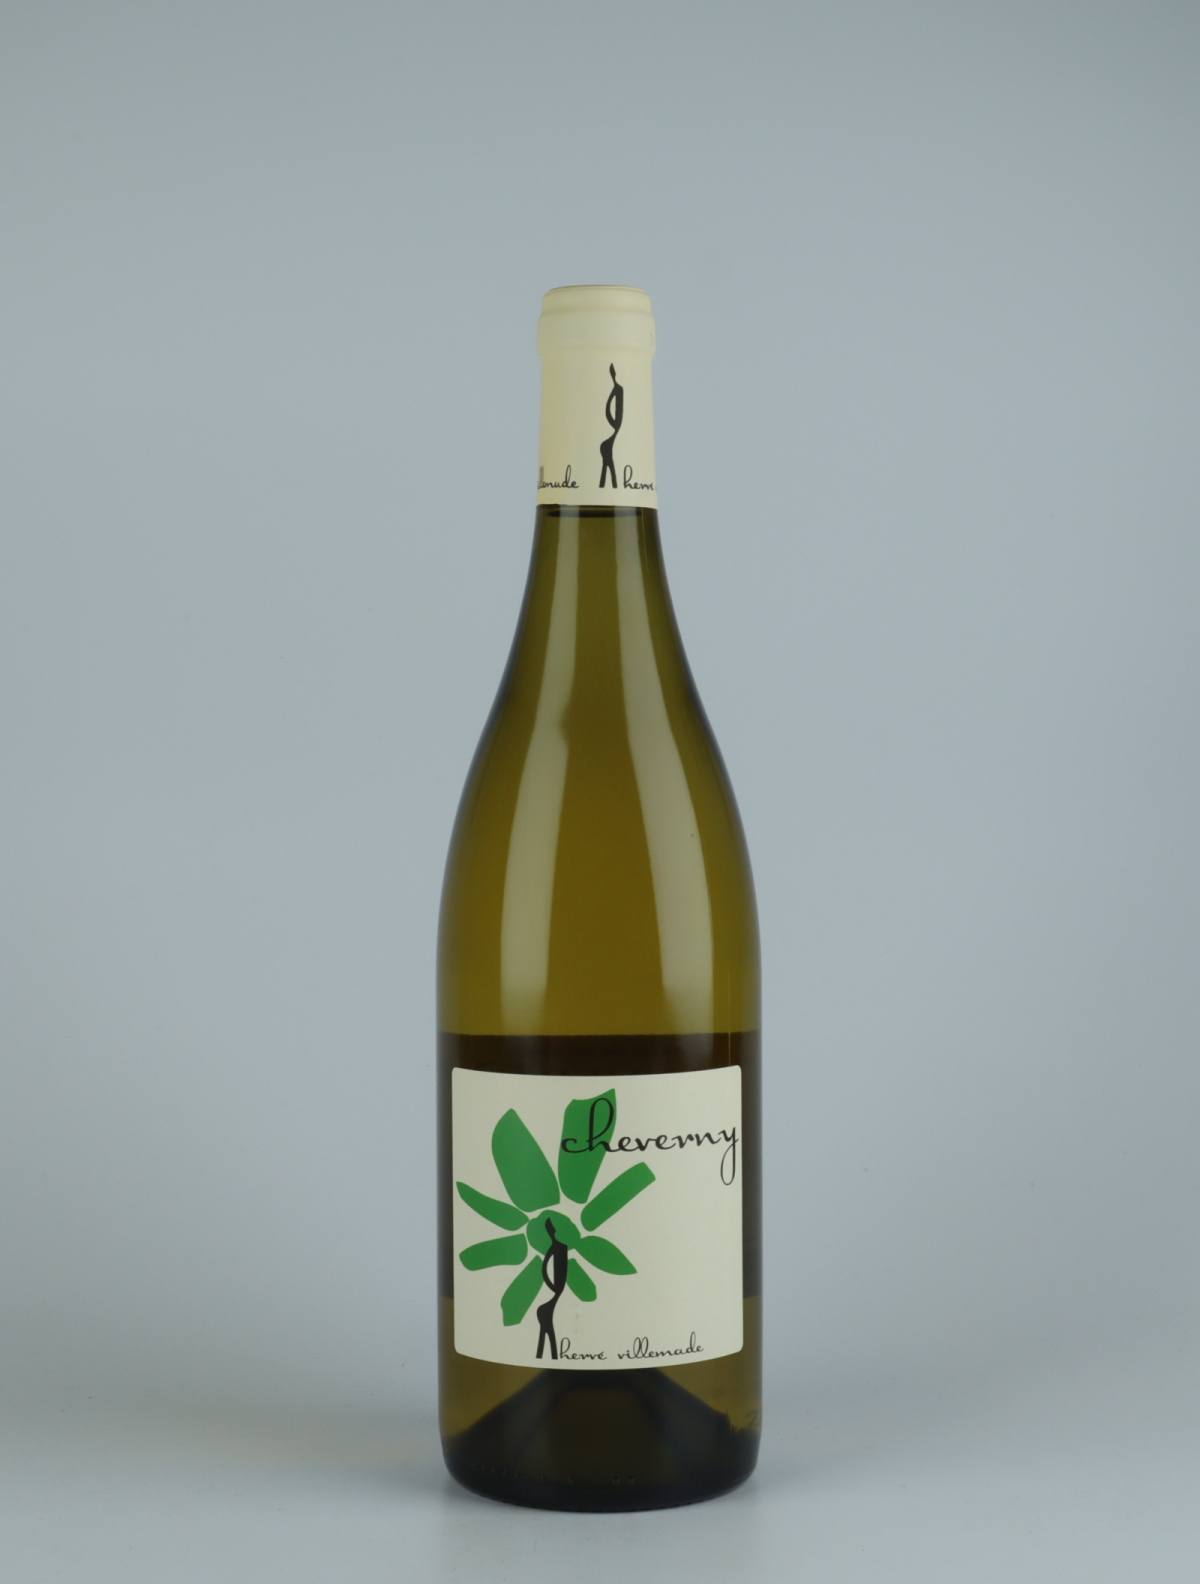 A bottle 2020 Cheverny Blanc White wine from Hervé Villemade, Loire in France